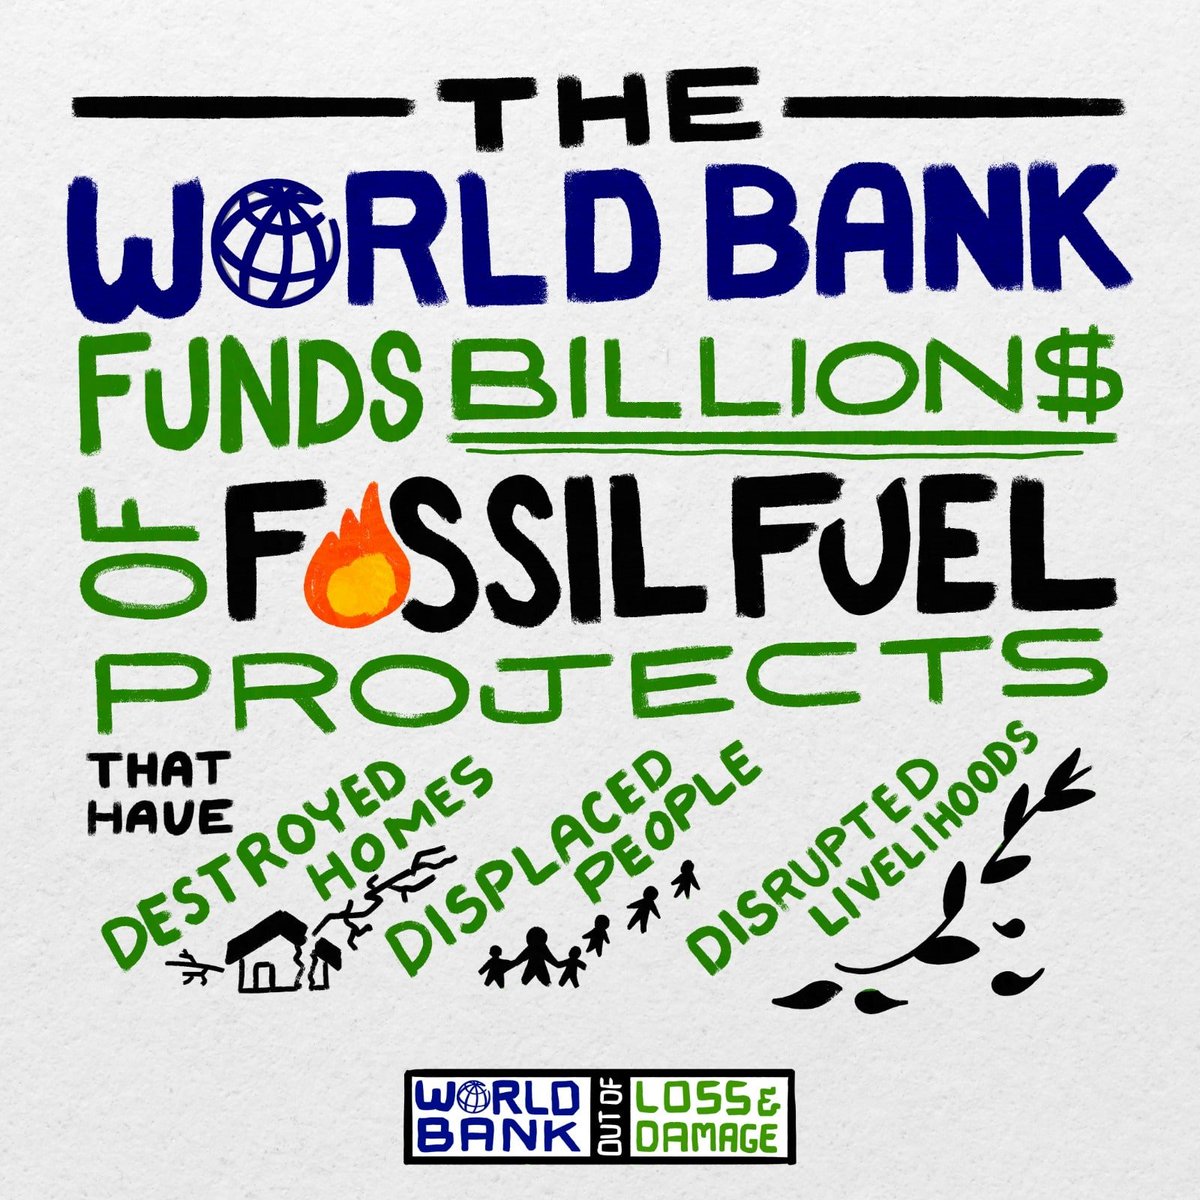 🇺🇸 & 🇪🇺 want the #LossAndDamageFund under the @WorldBank. This will NOT bring justice for those whose #humanrights are harmed by the #climatecrisis.

The WB
❌ funds #fossilfuels
❌ plunges nations into debt
❌ limits people's participation

#WBOutOfLDF #ReparationsForClimateDebt